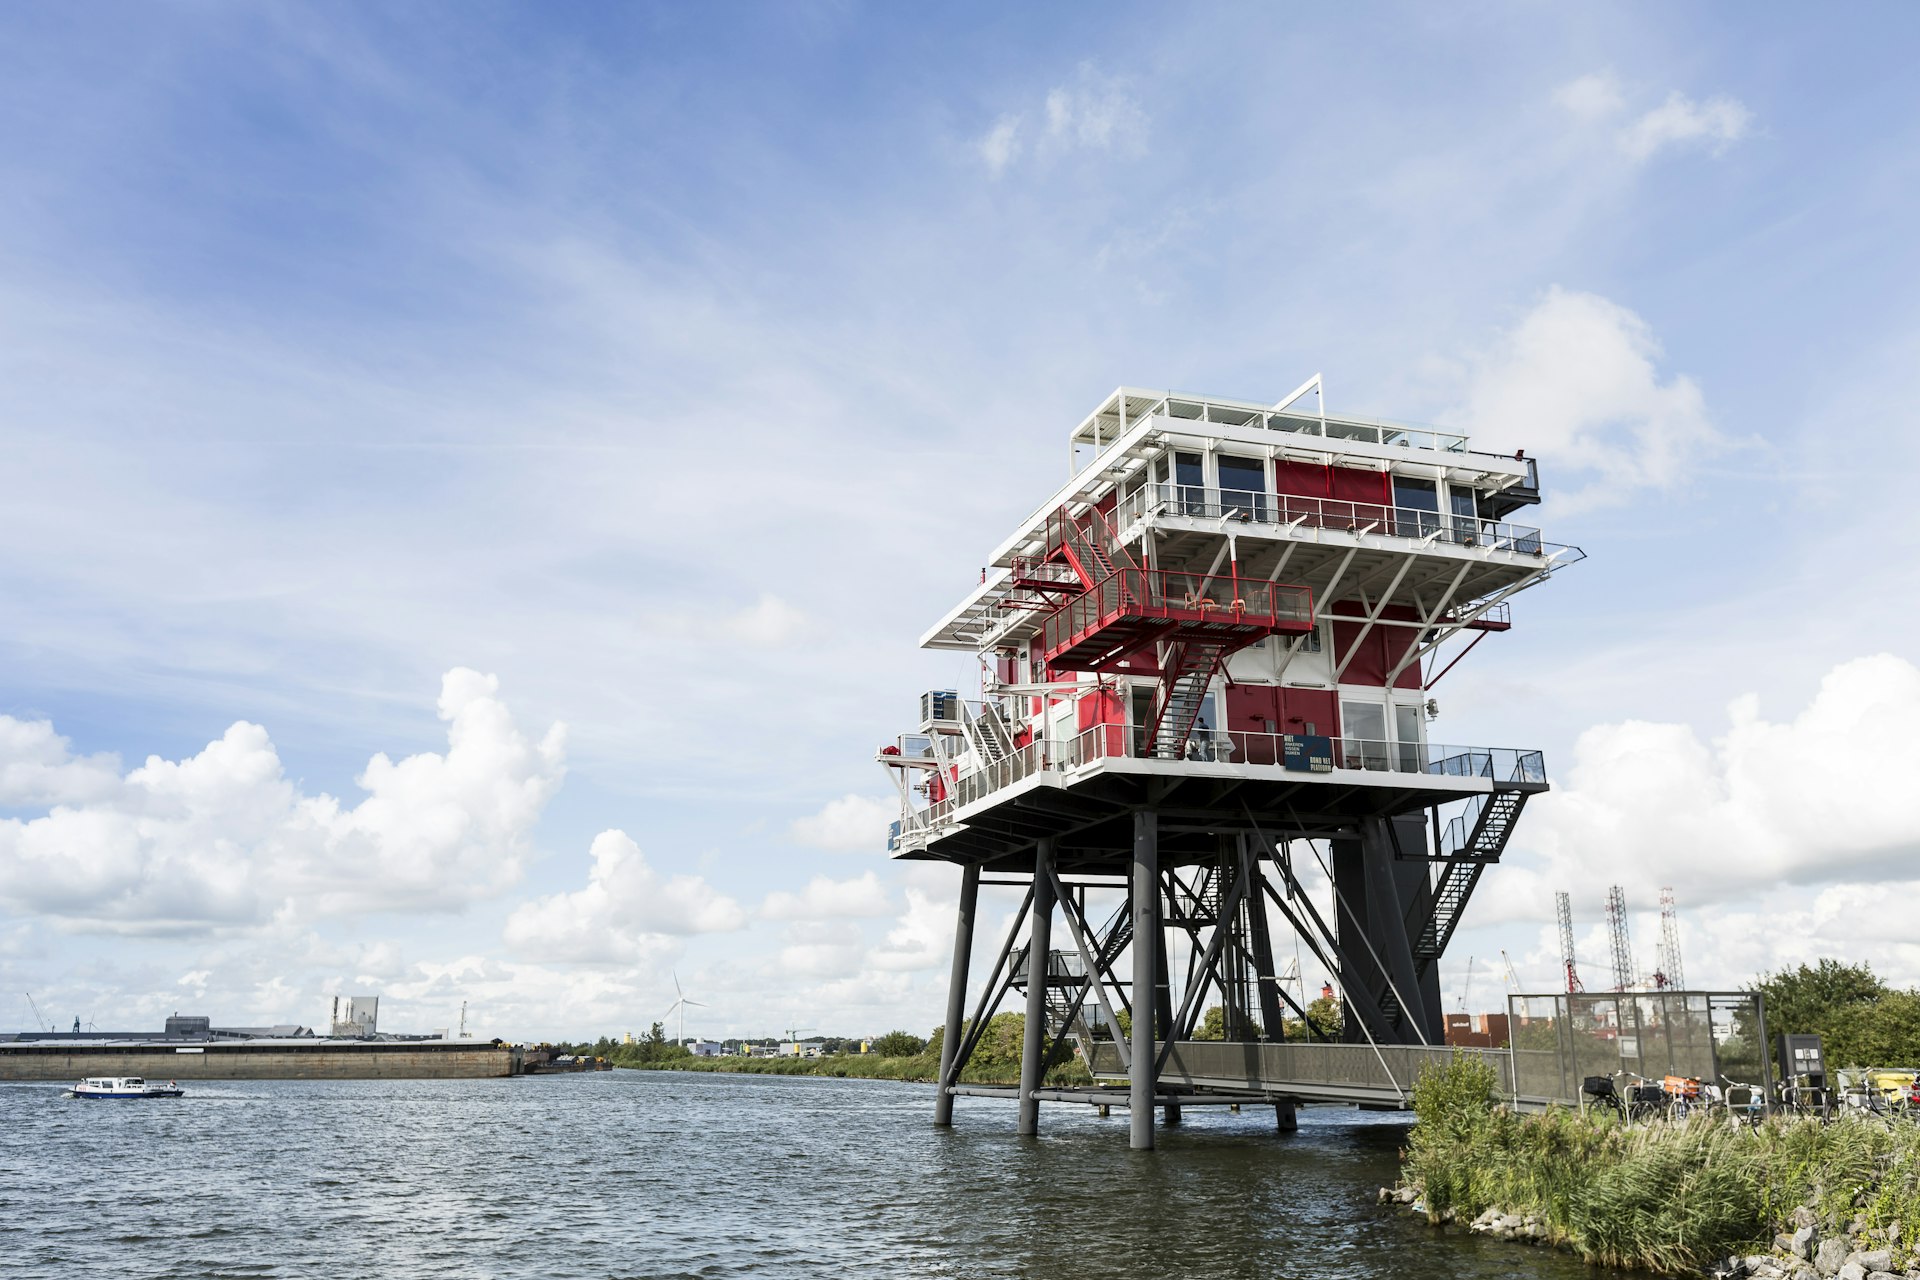 An exterior view of REM Eiland restaurant in Amsterdam towering above the water